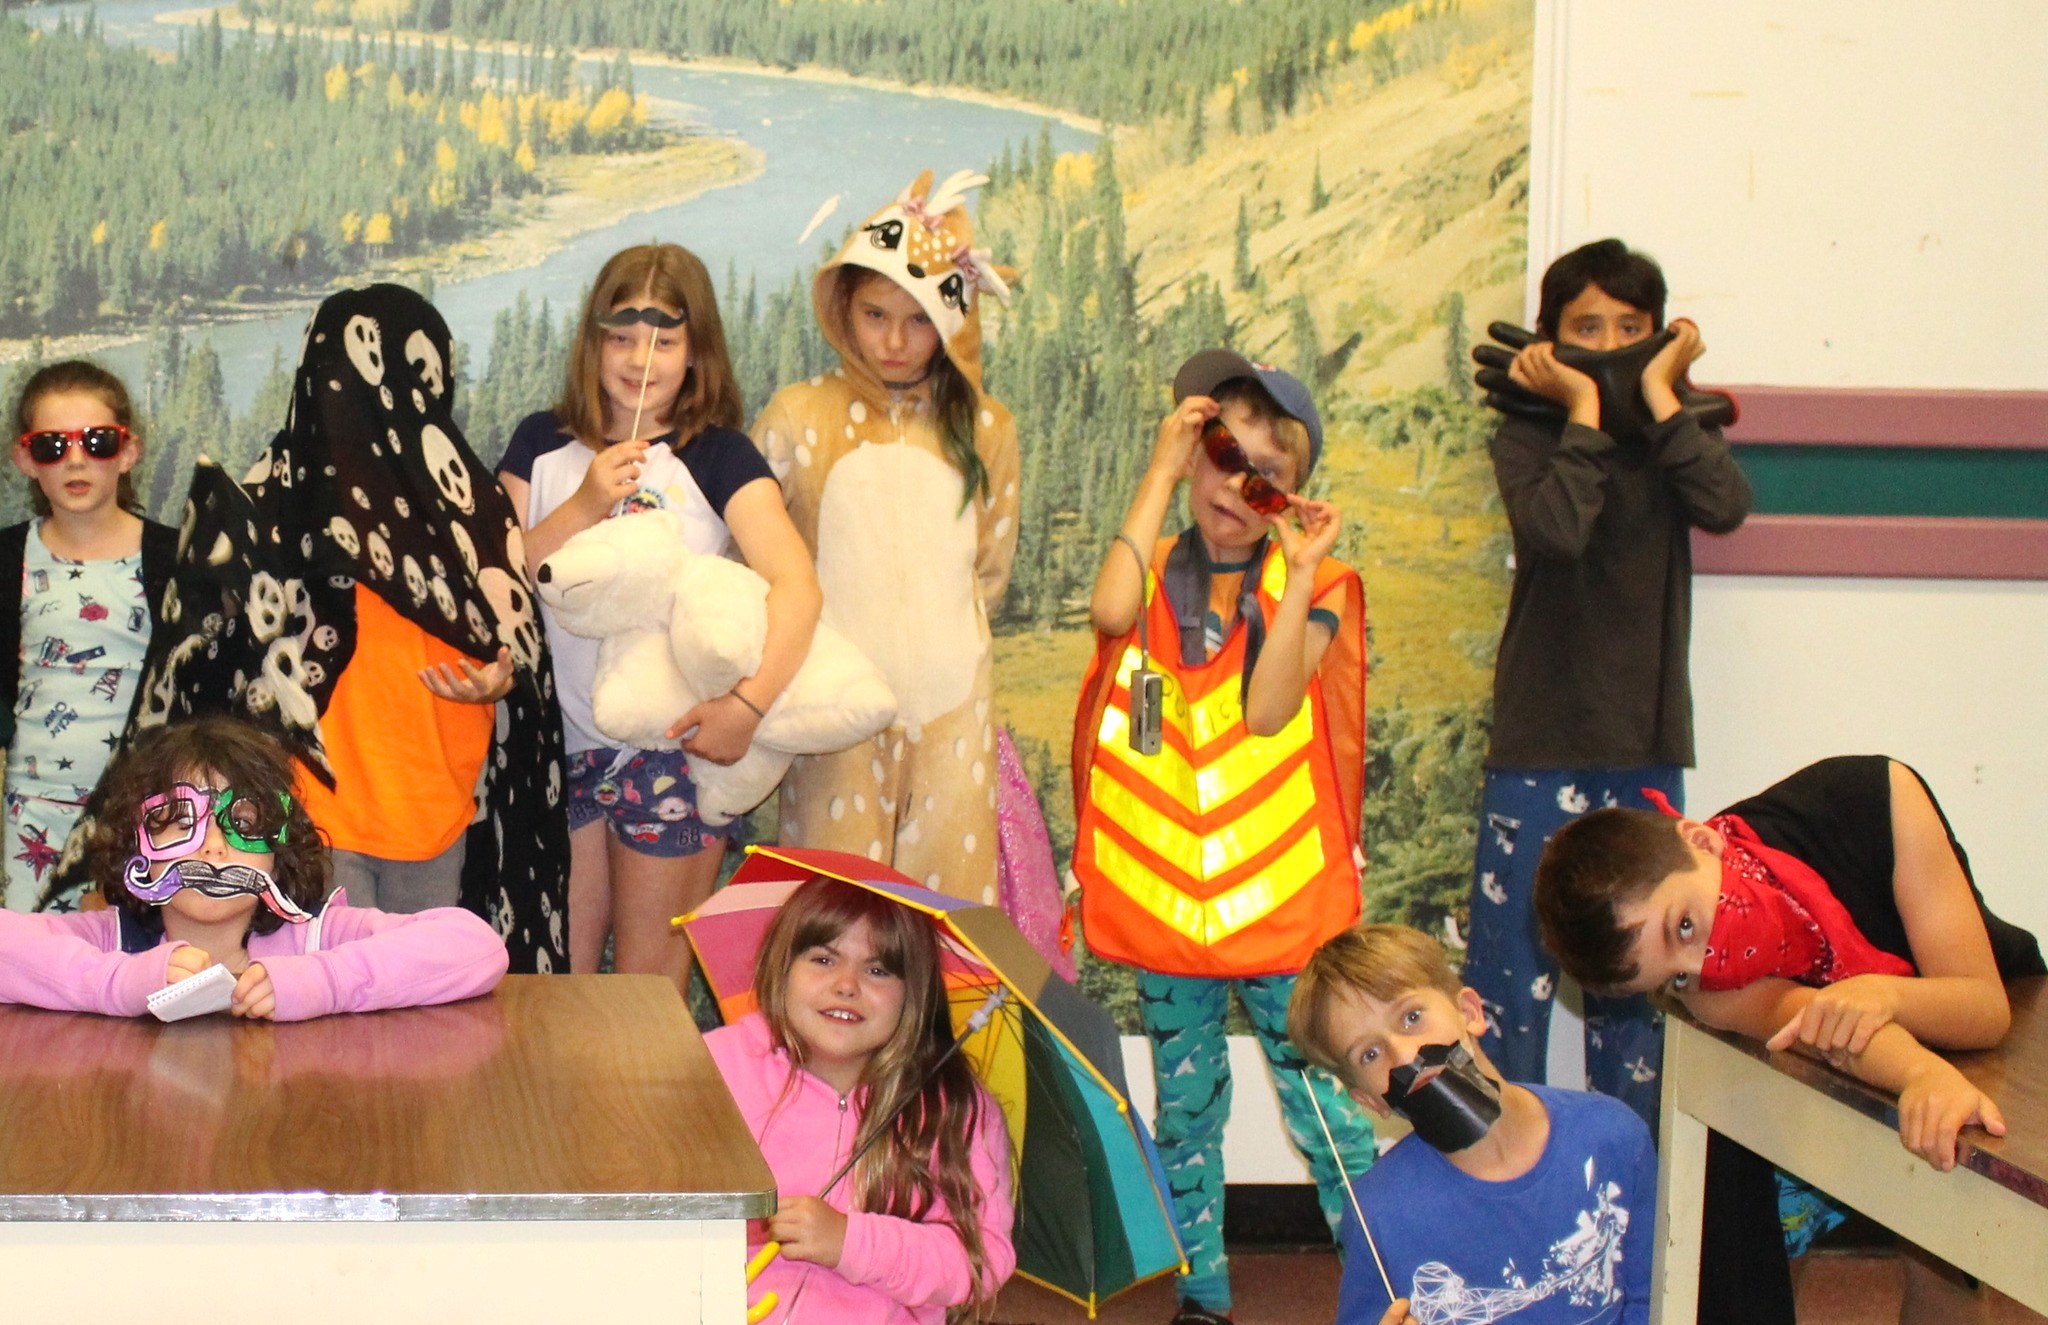 Ten children dressed in costumes having fun and posing in the Diefenbunker's Cafeteria.